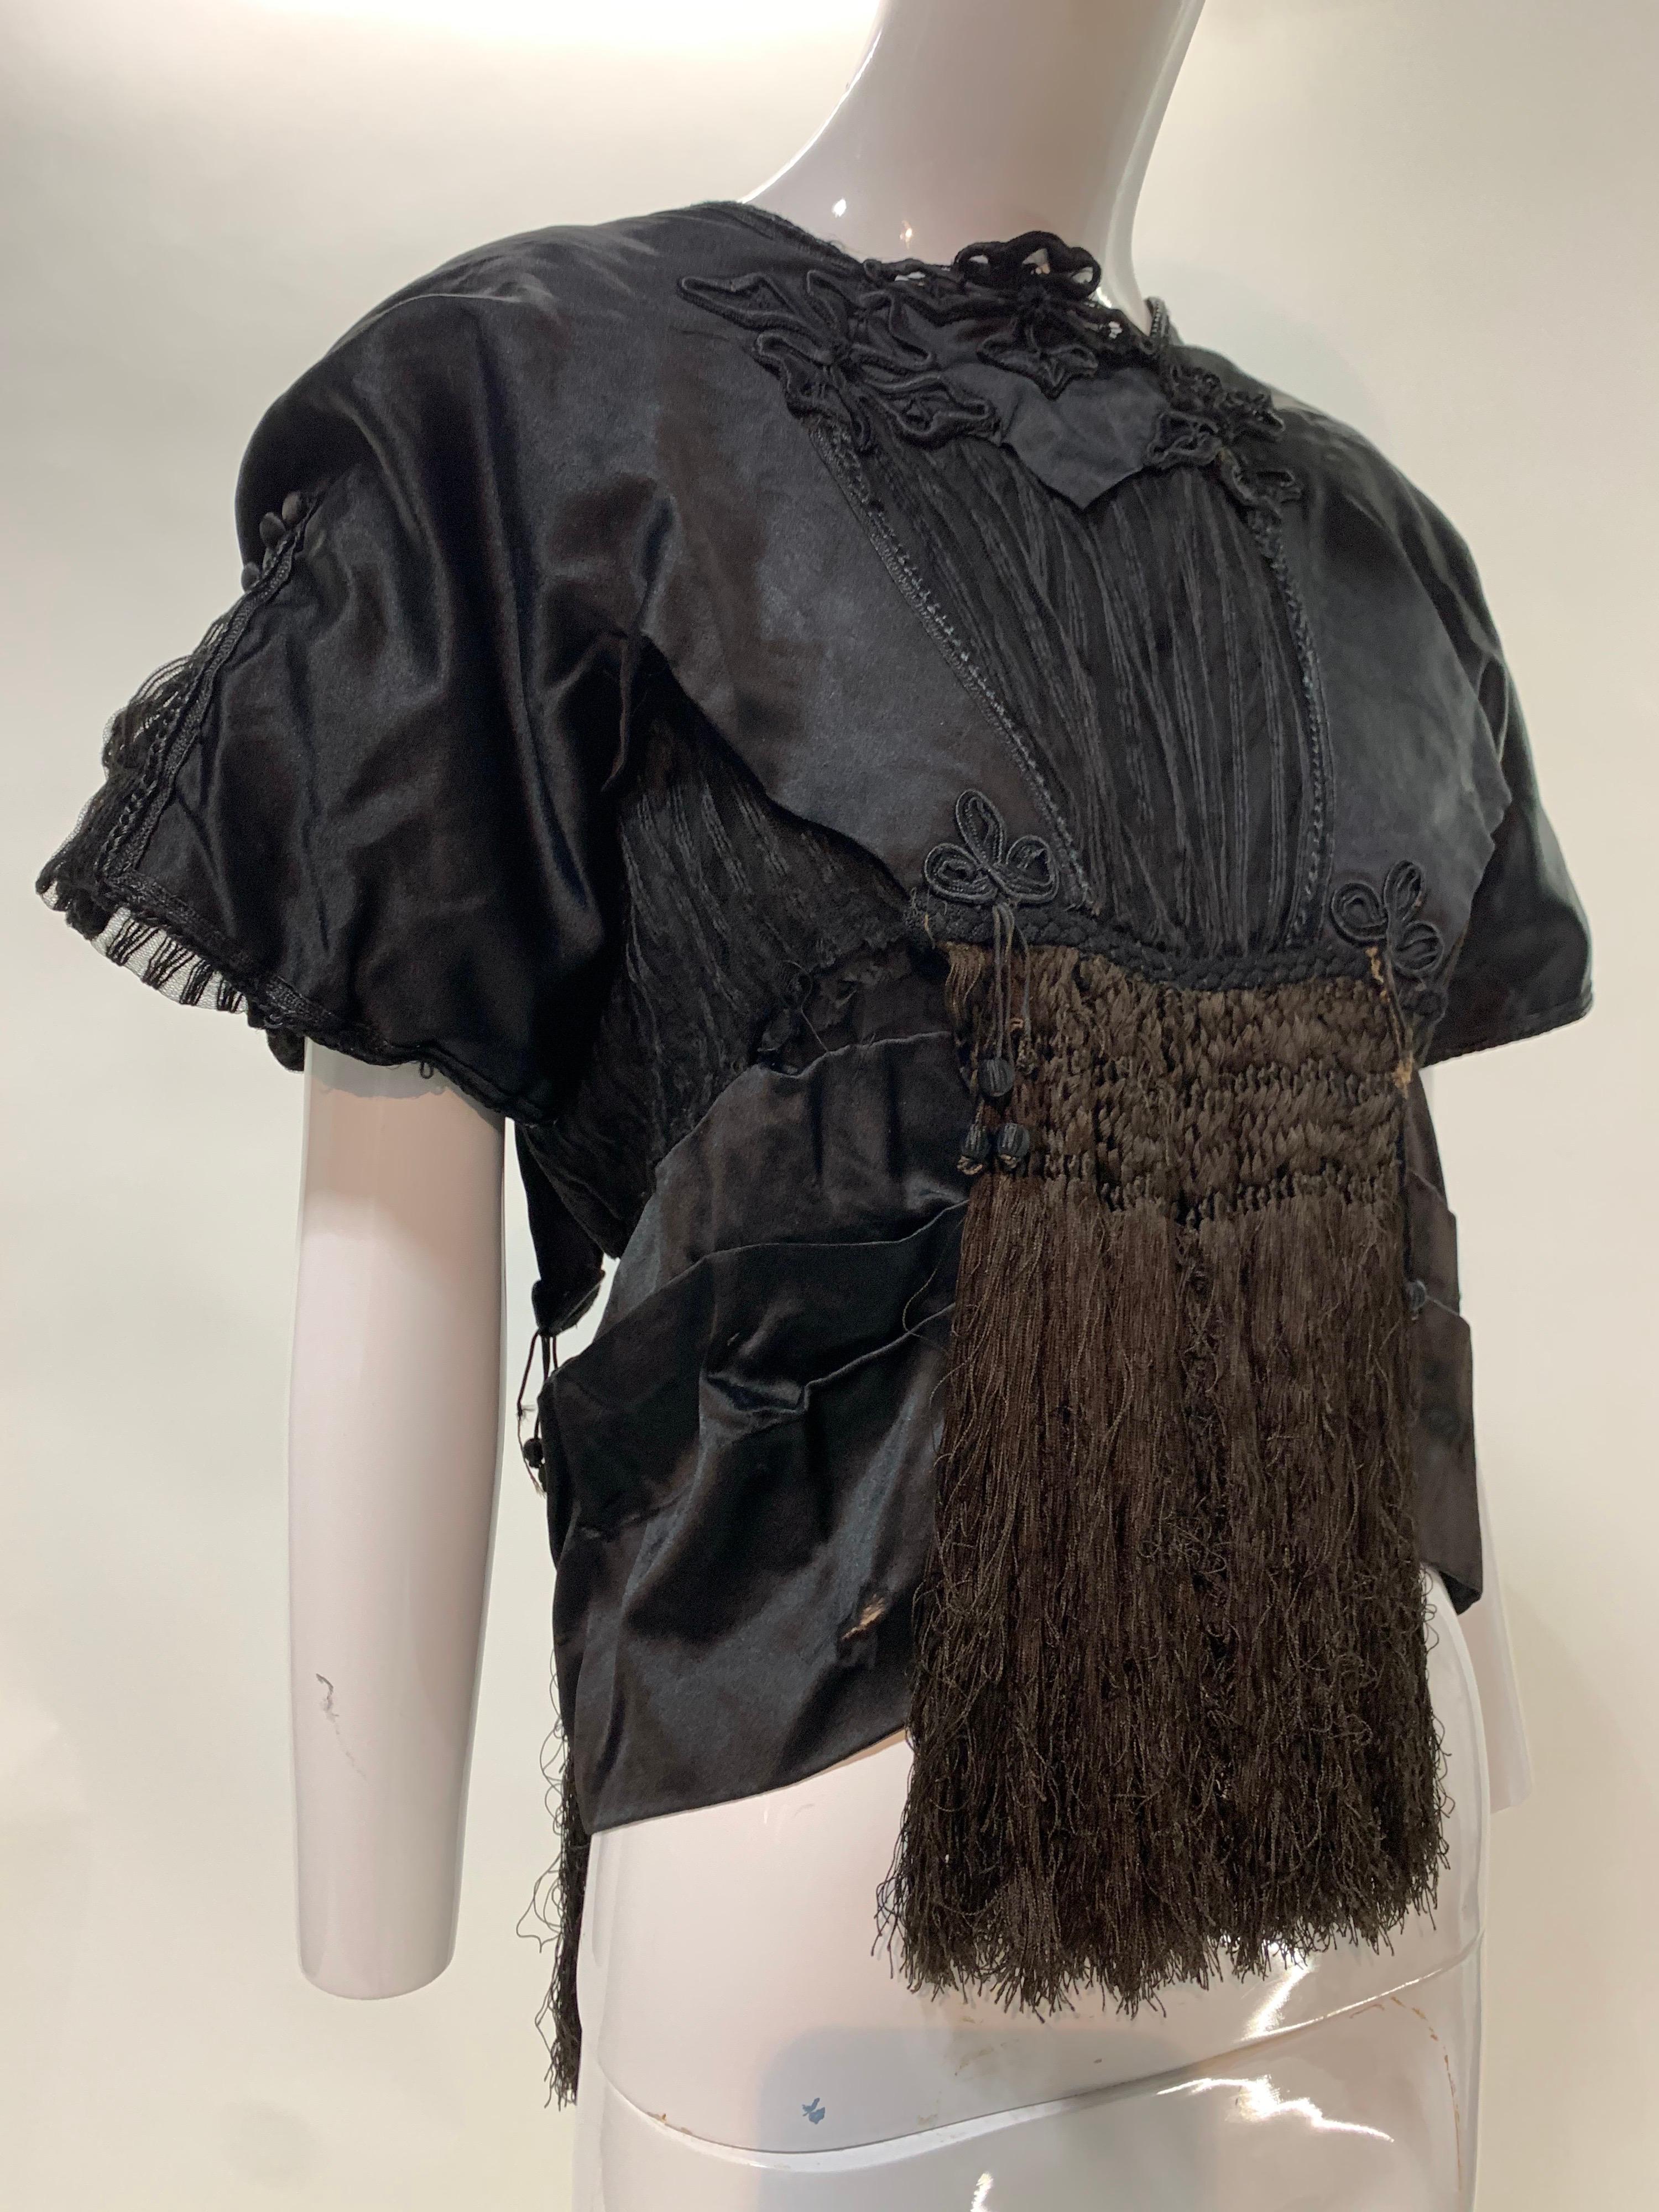 A stunning Edwardian black silk satin blouse with extravagant silk fringe at front and back center, lace trim and full gathered cap sleeves. Tie at center back. Generously embellishment at every glance. Size  4-6